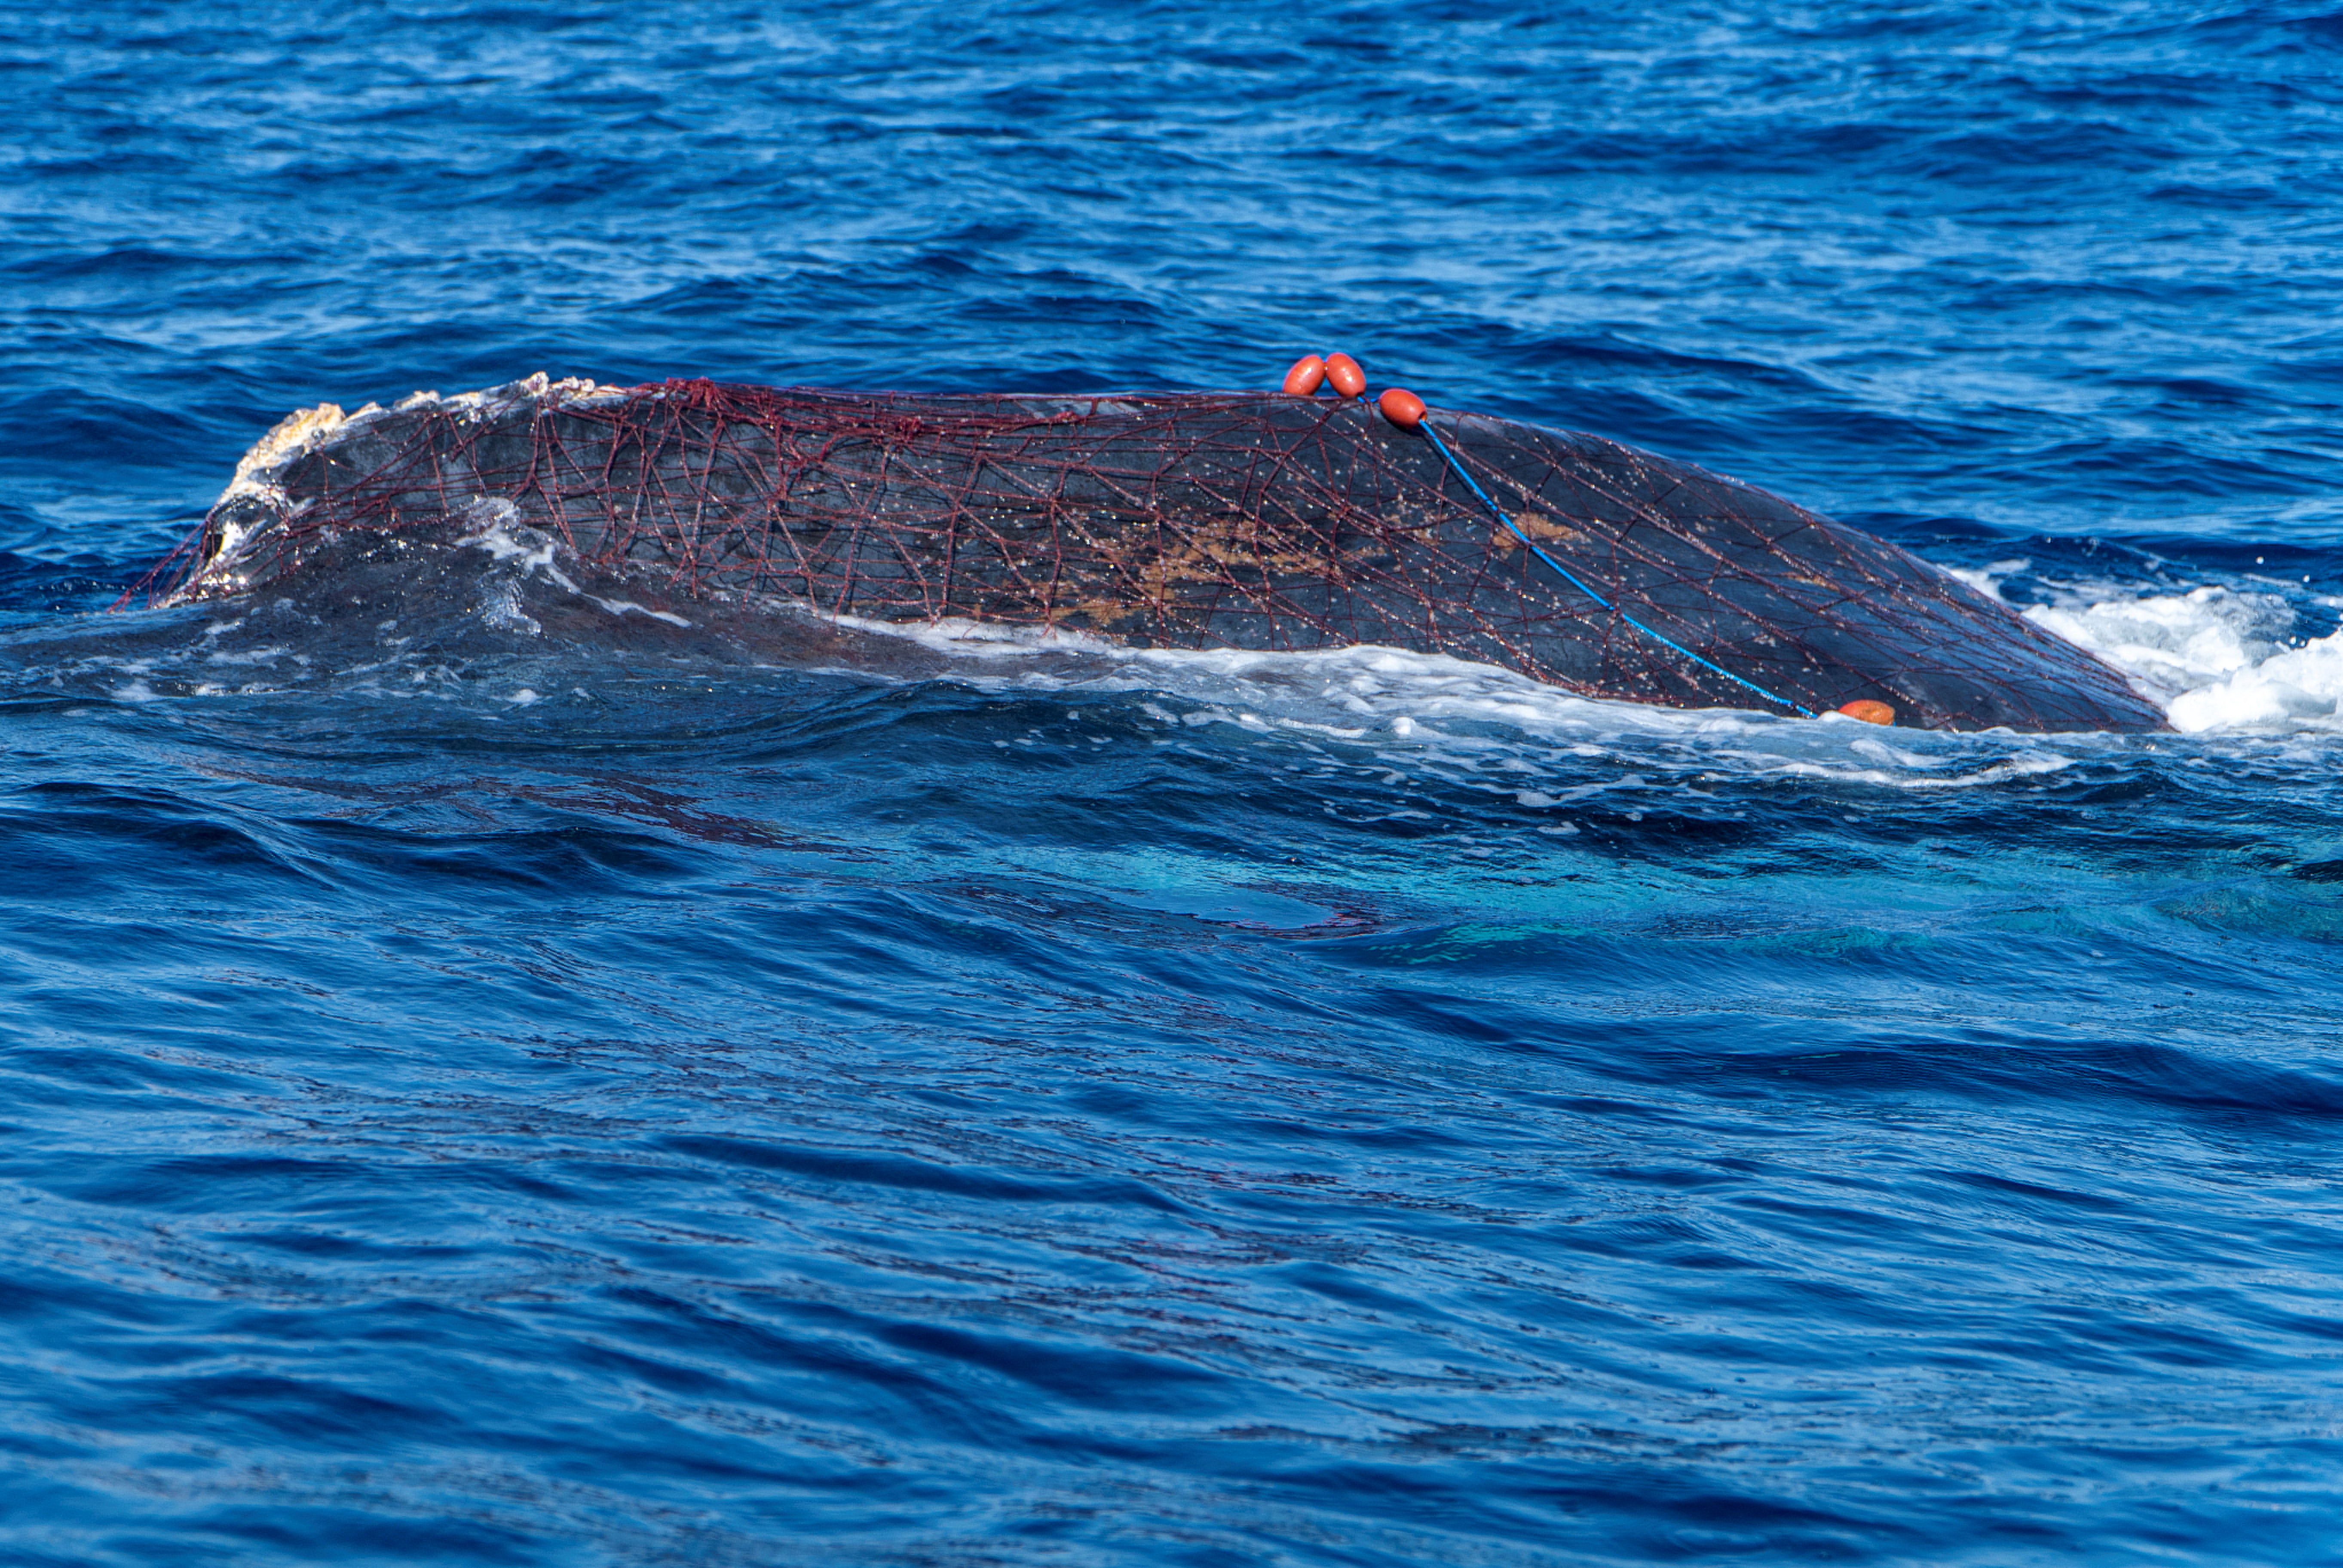 'Best birthday present ever!' says Spanish diver after saving trapped whale in Mallorca